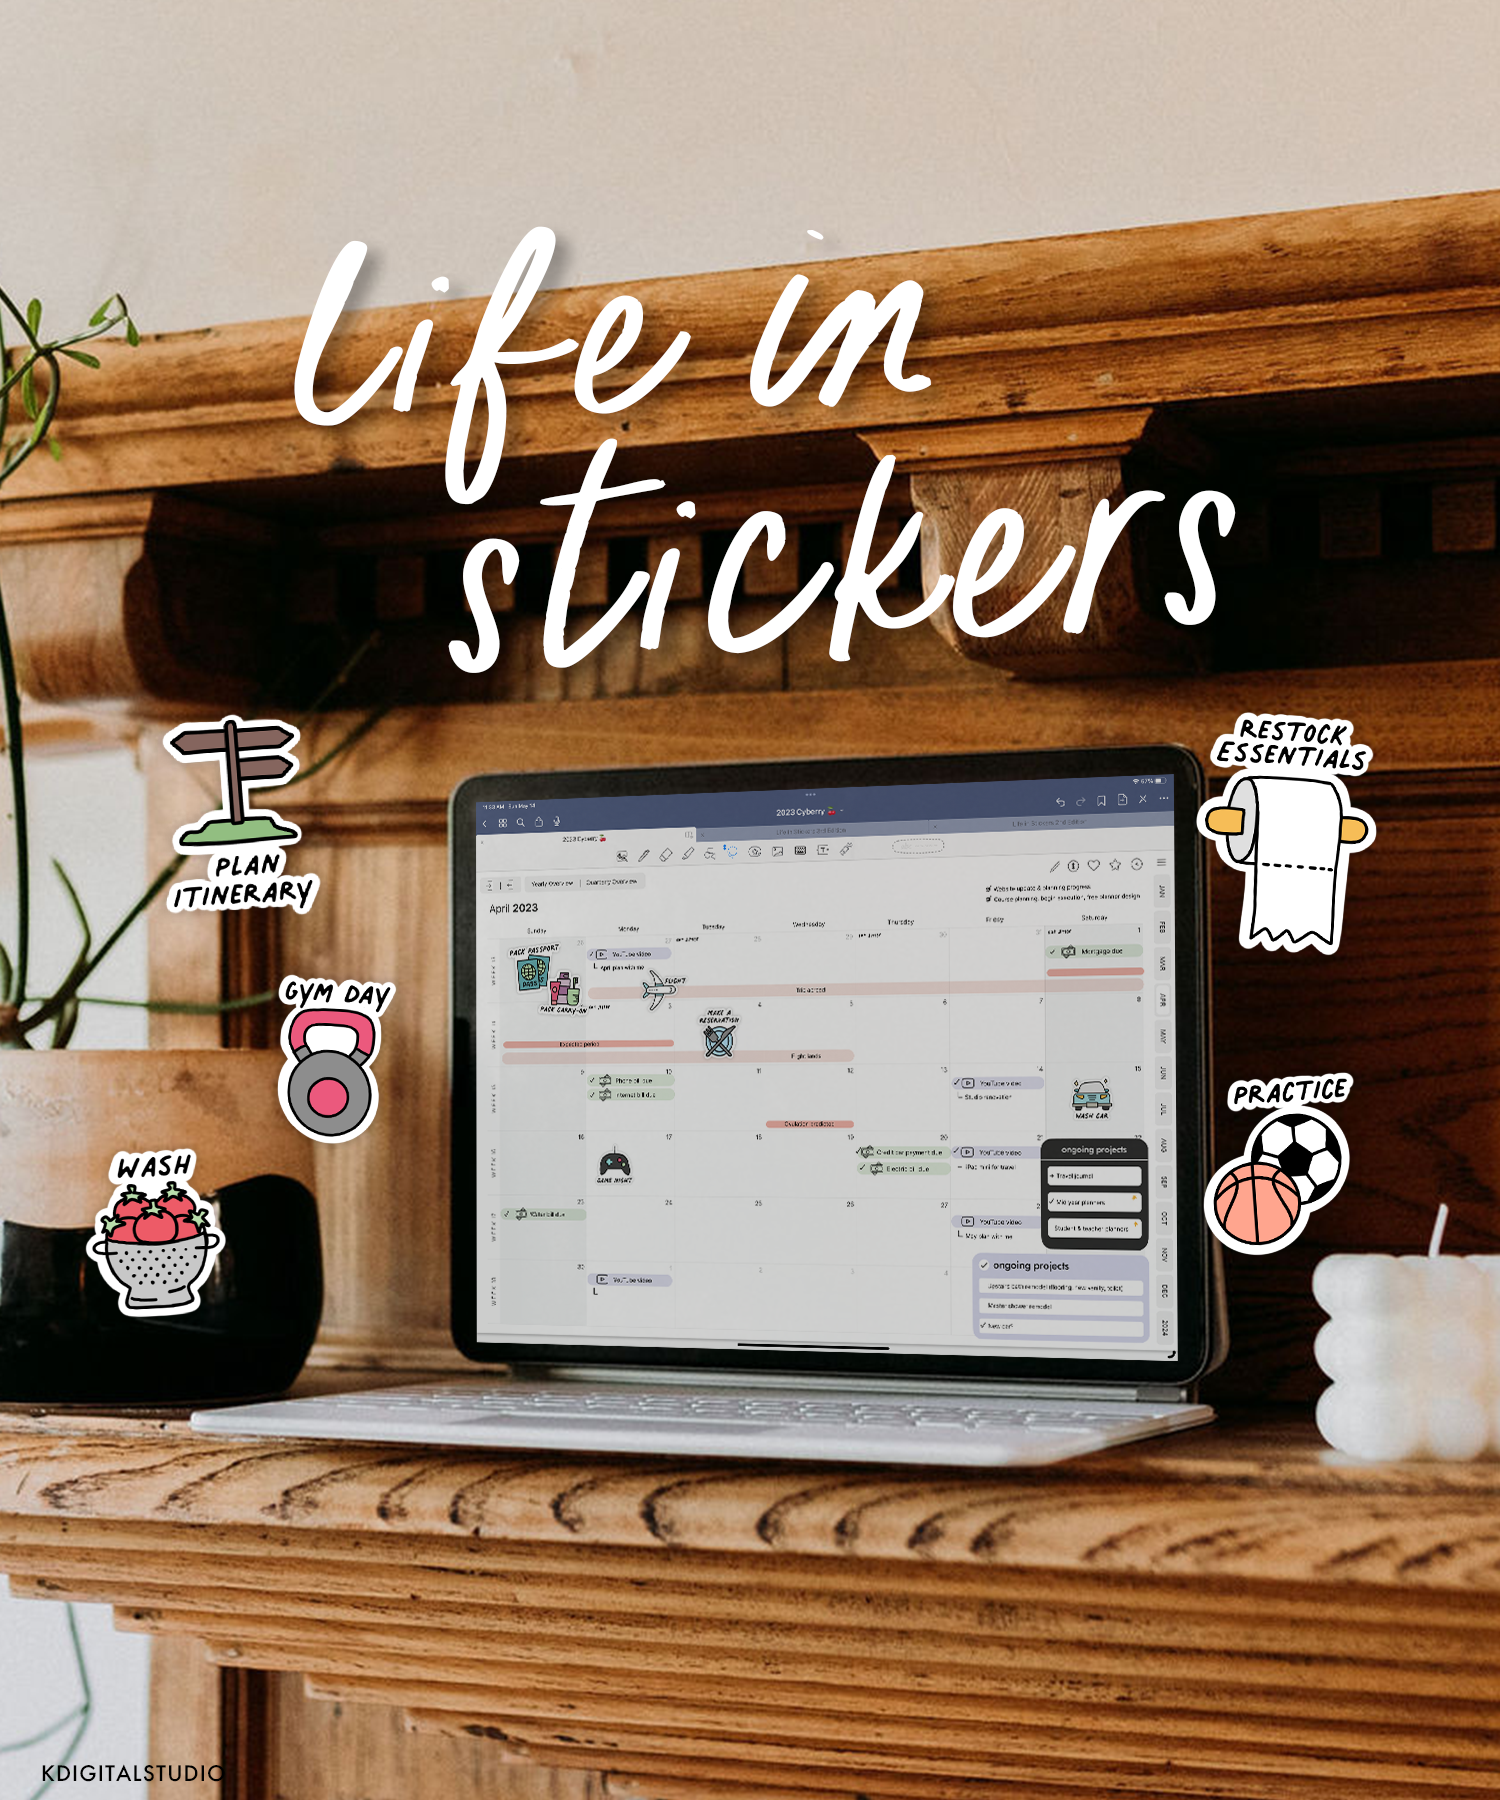 iPad sitting on mantle surrounded by Life in Stickers set